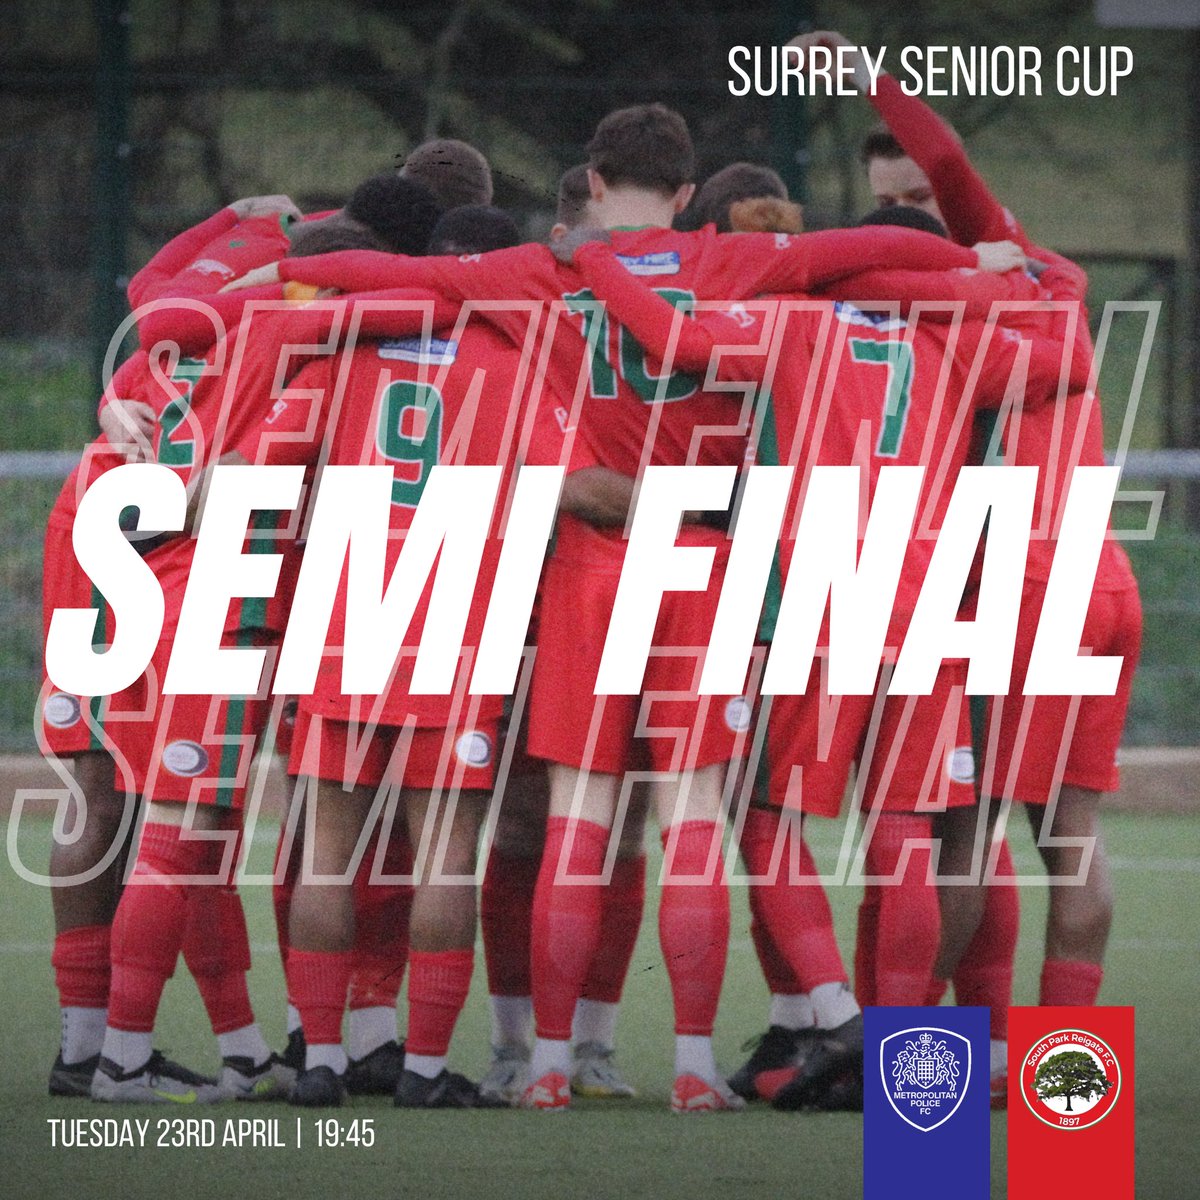 𝗦𝗨𝗥𝗥𝗘𝗬 𝗦𝗘𝗡𝗜𝗢𝗥 𝗖𝗨𝗣 𝗡𝗘𝗪𝗦 | 🚨 We have been re-instated into the Surrey Senior Cup meaning that we play @MetPoliceFC at Imber Court in the Semi Final on Tuesday 23rd April 🗓️ Get it in the diary 🙌 #UpTheSparks #WeAreSouthPark ❤️💚🌳⚡️